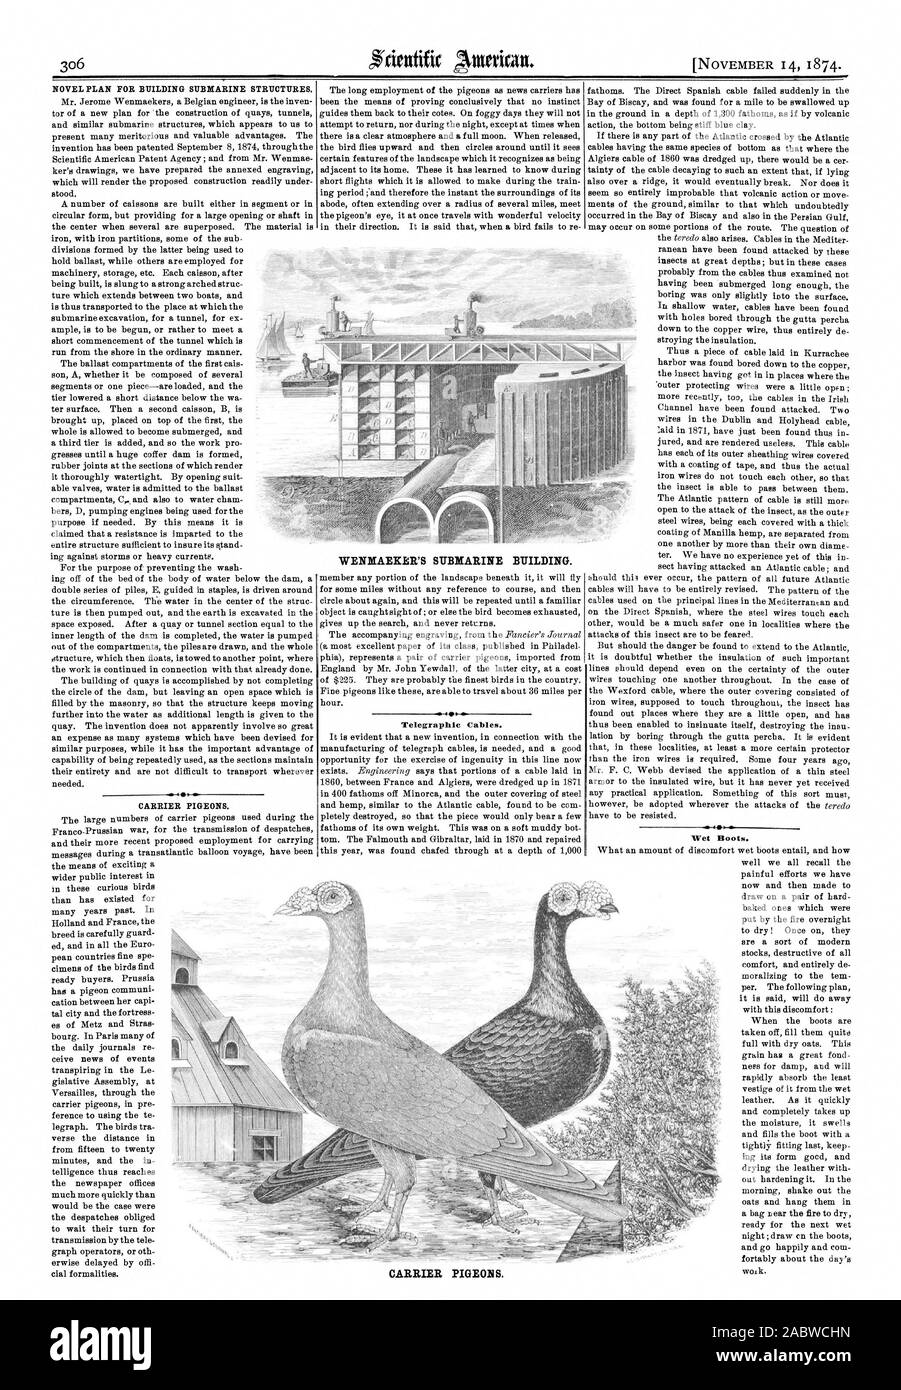 306 NOVEL PLAN FOR BUILDING SUBMARINE STRUCTURES.  I . CARRIER PIGEONS. WENMAEKER'S SUBMARINE BUILDING. 461 is Telegraphic Cables. Wet Boots. CARRIER PIGEONS. I, scientific american, 1874-11-14 Stock Photo